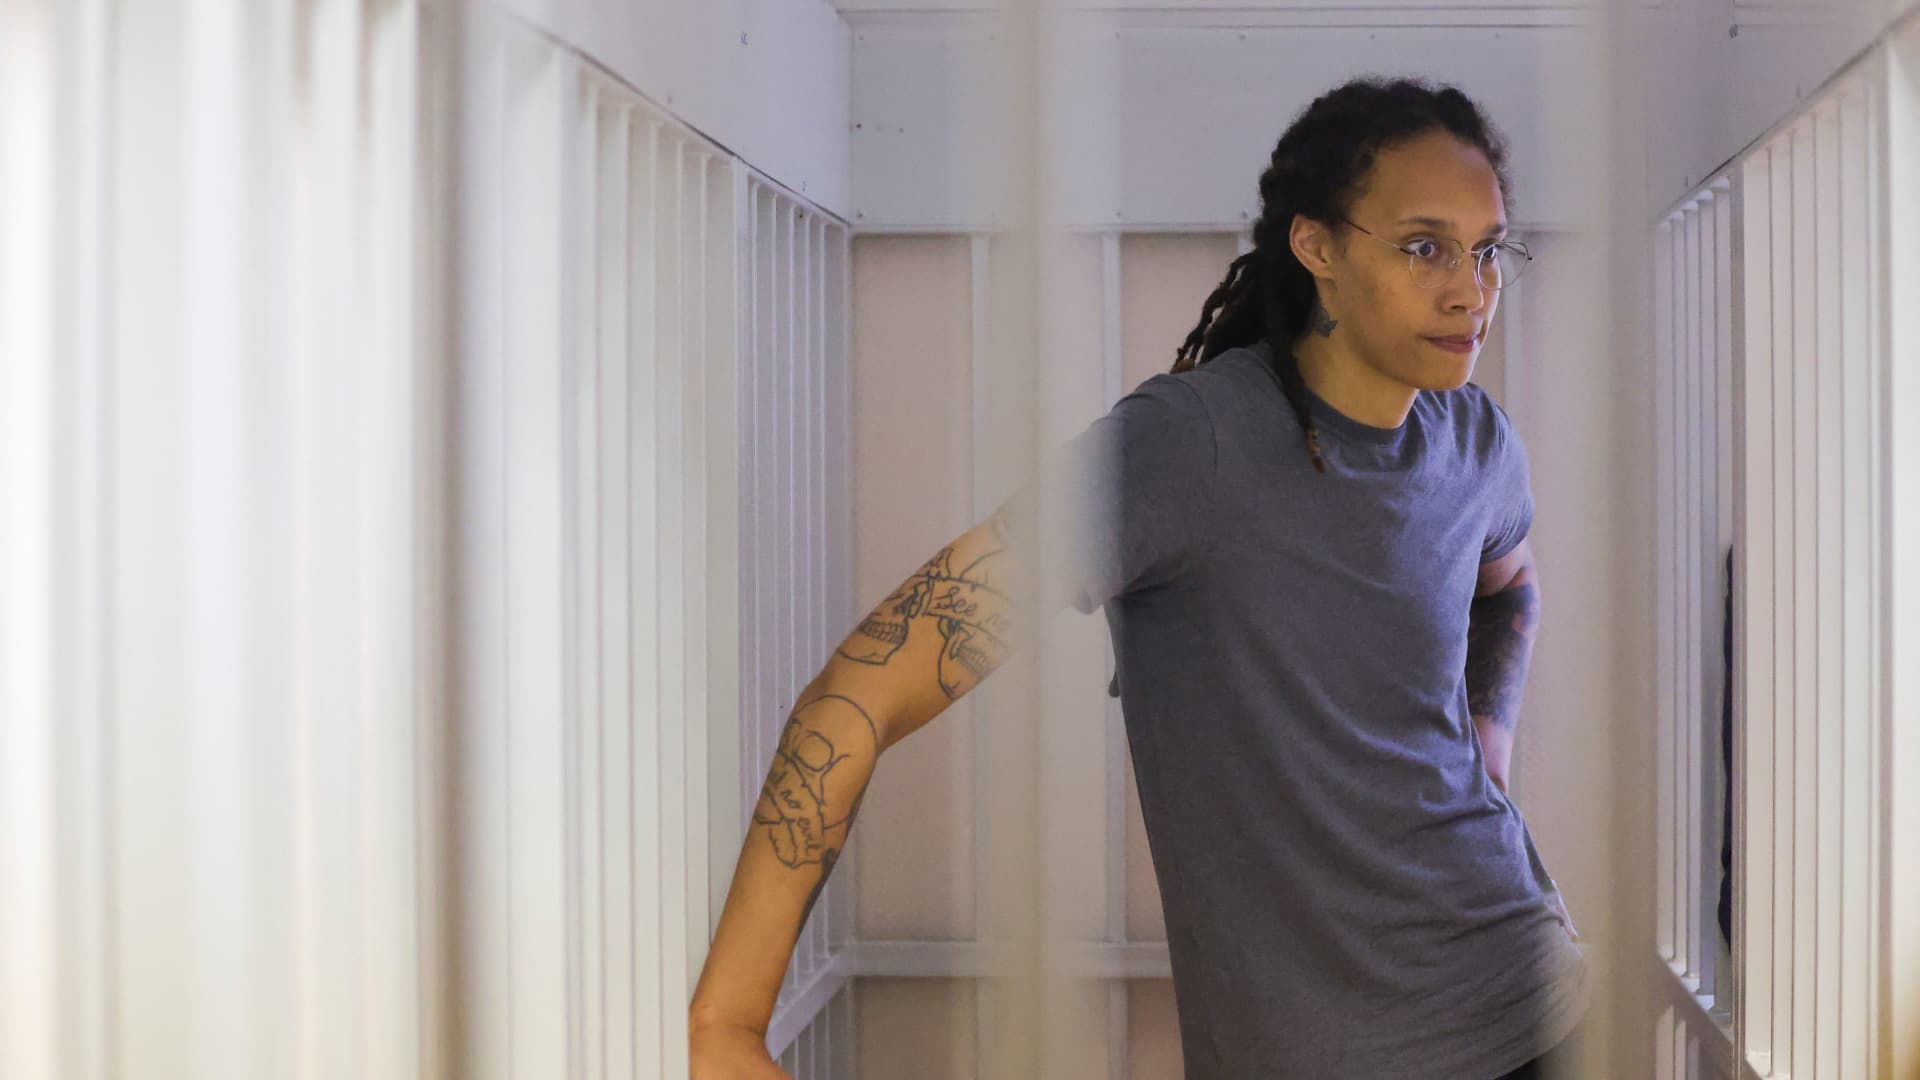 US' Women's National Basketball Association (NBA) basketball player Brittney Griner, who was detained at Moscow's Sheremetyevo airport and later charged with illegal possession of cannabis, waits for the verdict inside a defendants' cage before a court hearing in Khimki outside Moscow, on August 4, 2022. 